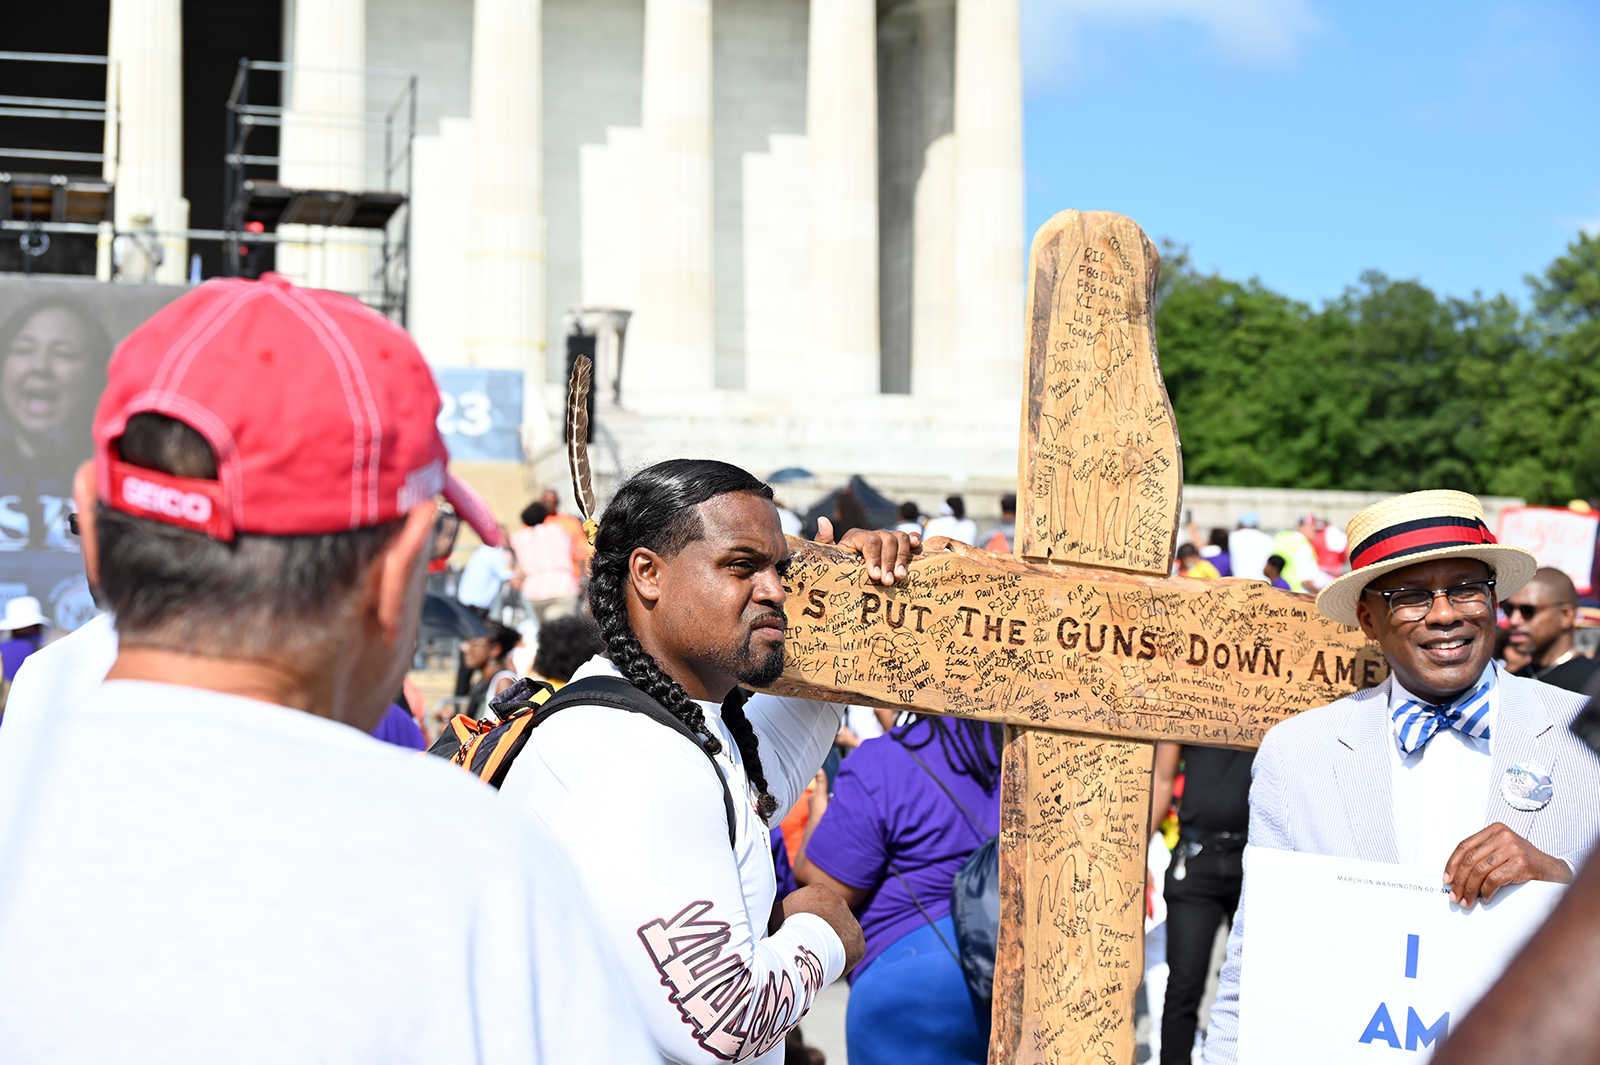 An attendee carries a large, wooden cross during 60th anniversary of the March on Washington at the Lincoln Memorial in Washington, D.C., on Aug. 26, 2023. RNS photo by Jack Jenkins.